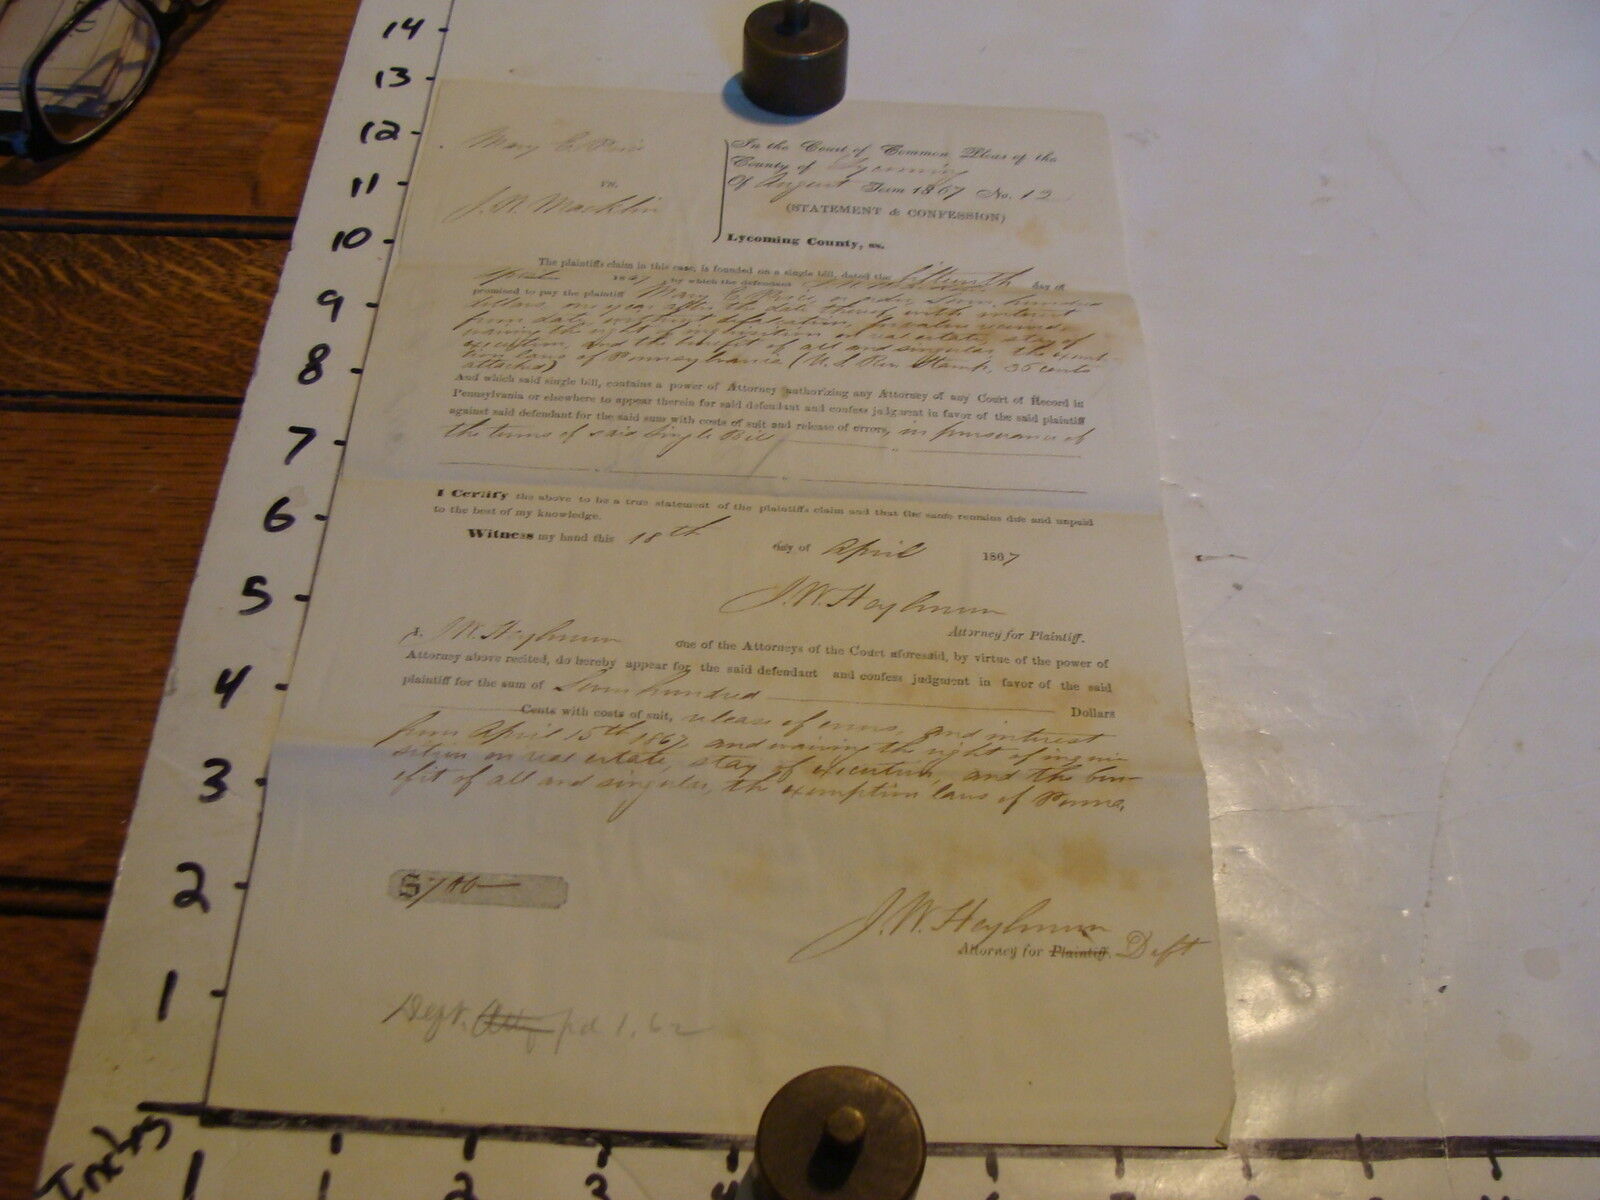 Vintage paper: Court document from April 15,1867, Mary E. Price vs. J. Macklin,